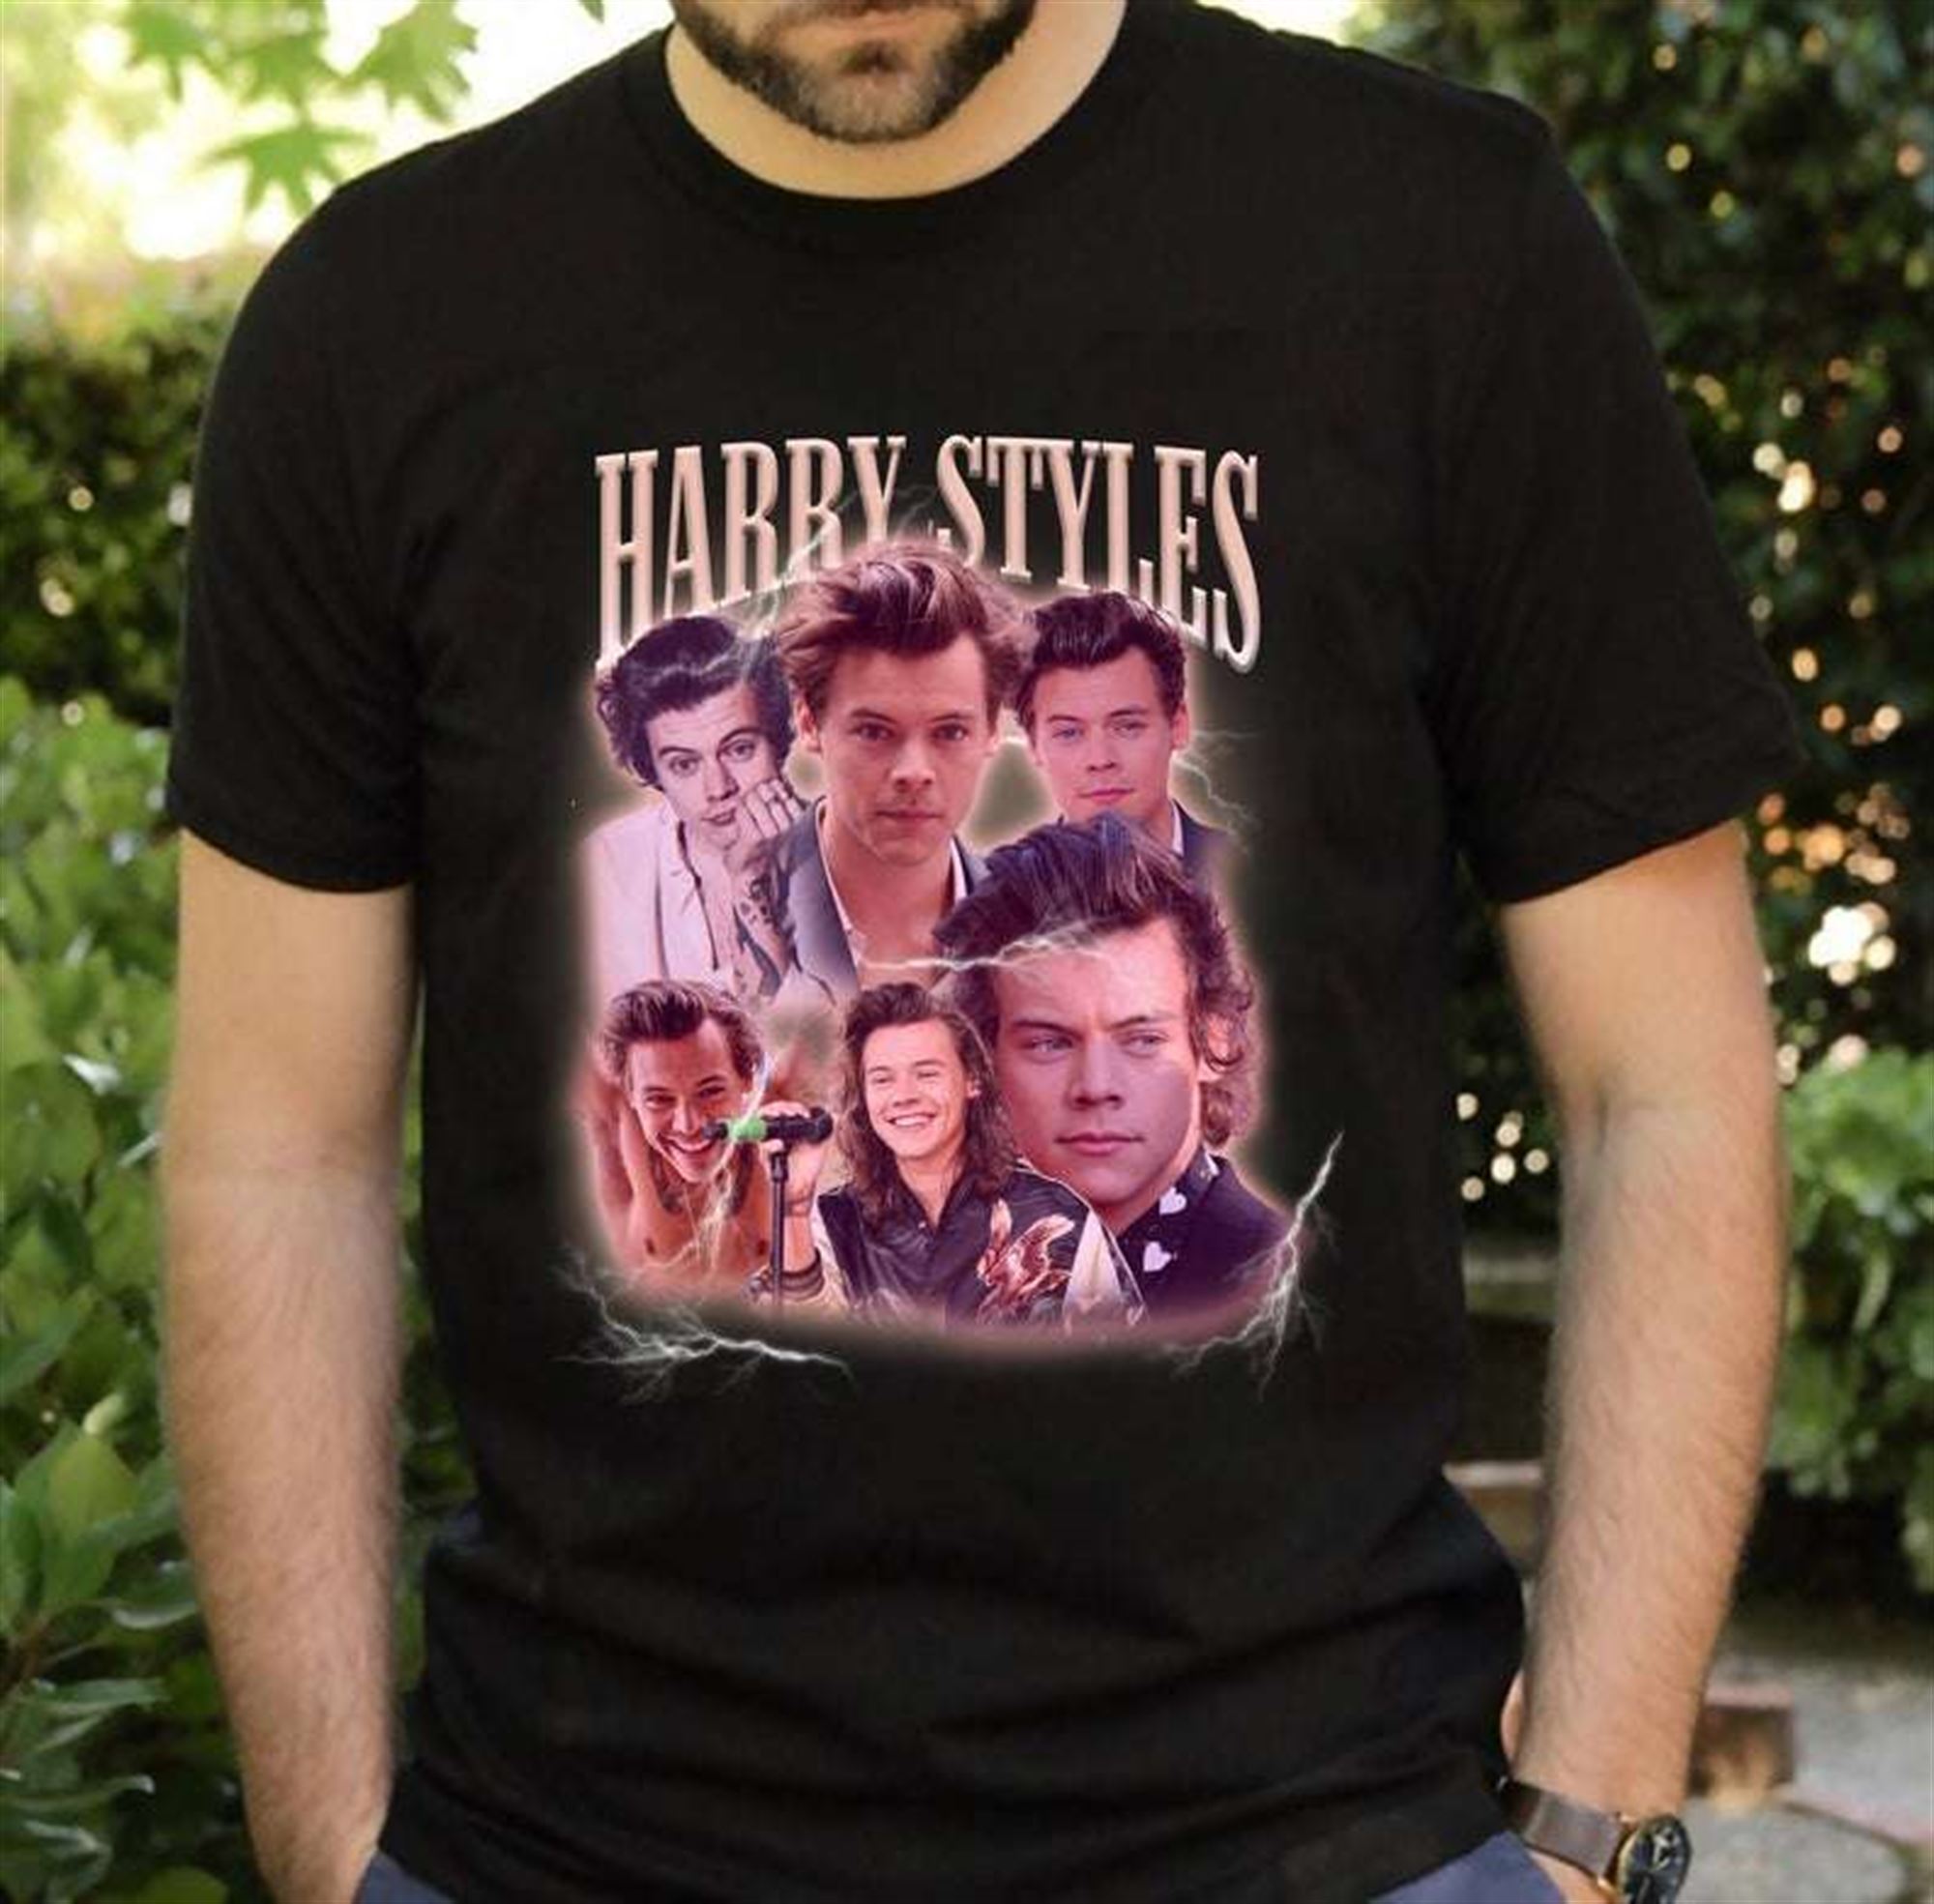 Harry Styles Vintage Classic Unisex T Shirt Size Up To 5xl